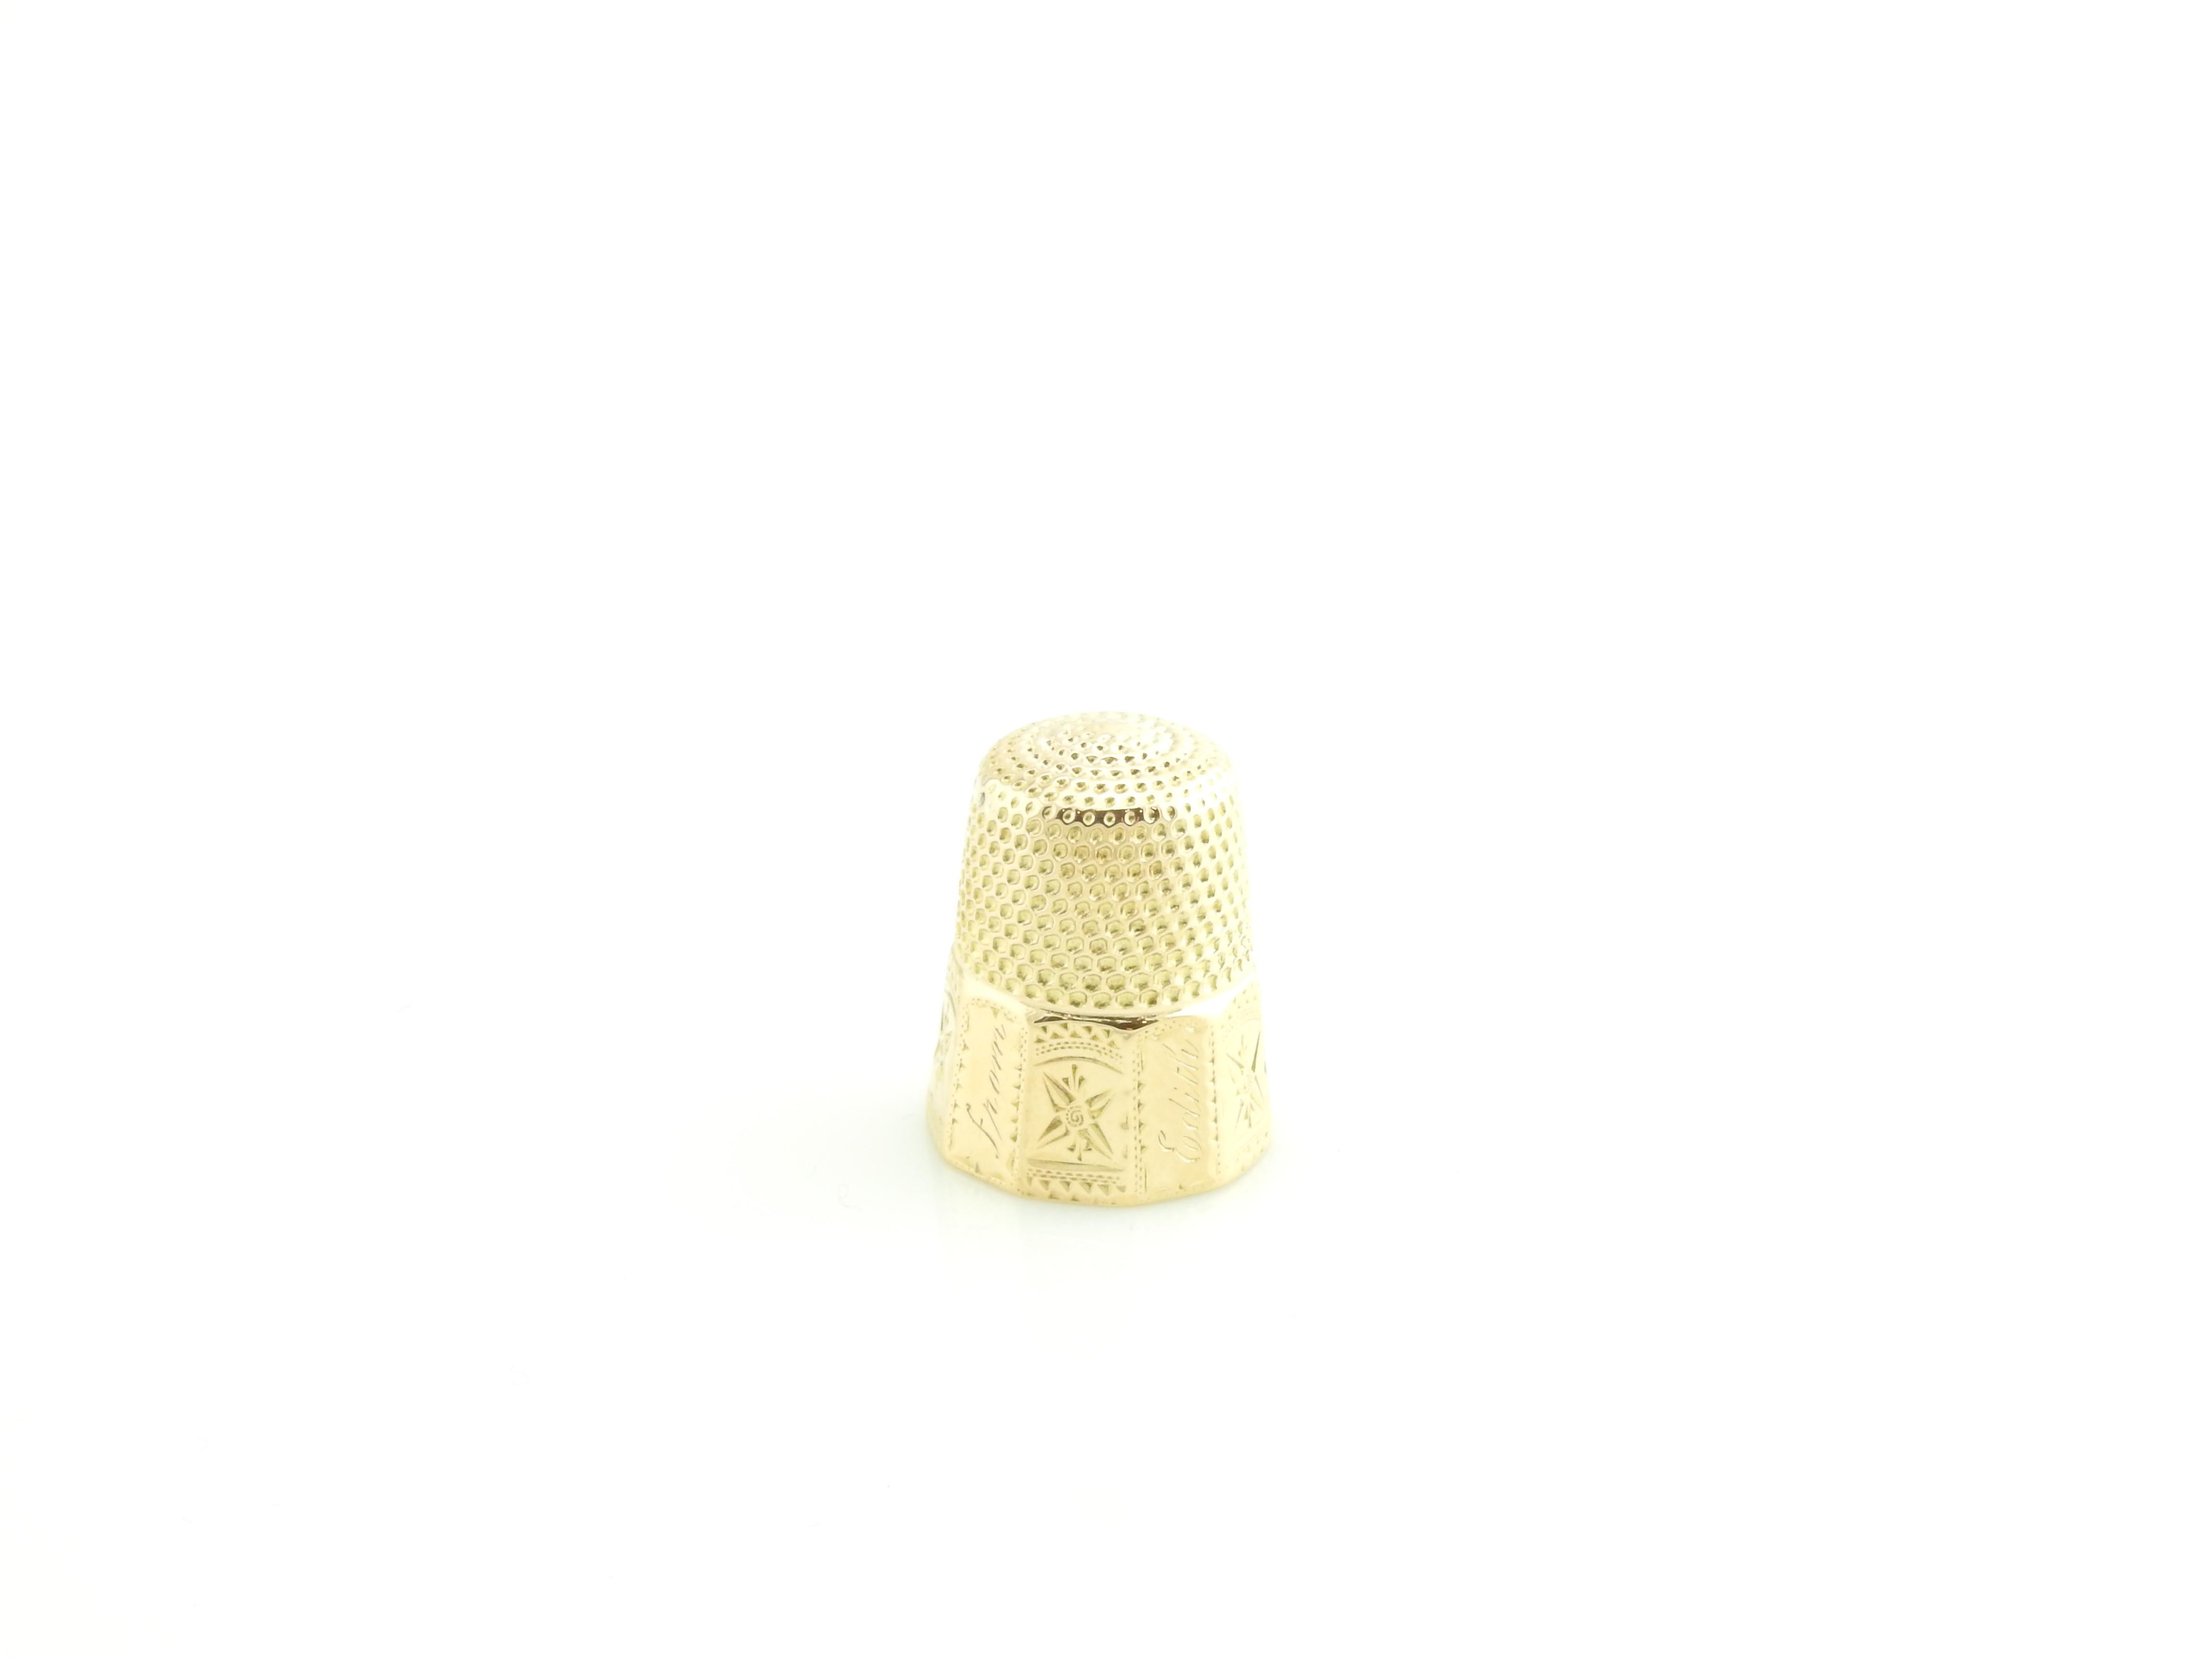 Vintage 14 Karat Yellow Gold Thimble

This lovely thimble is crafted in beautifully detailed 14K yellow gold.

Size: 19 mm x 15 mm

Weight: 2.5 dwt. / 4.0 gr.

Stamped: 14 inside the thimble

Very good condition, professionally polished.

Will come